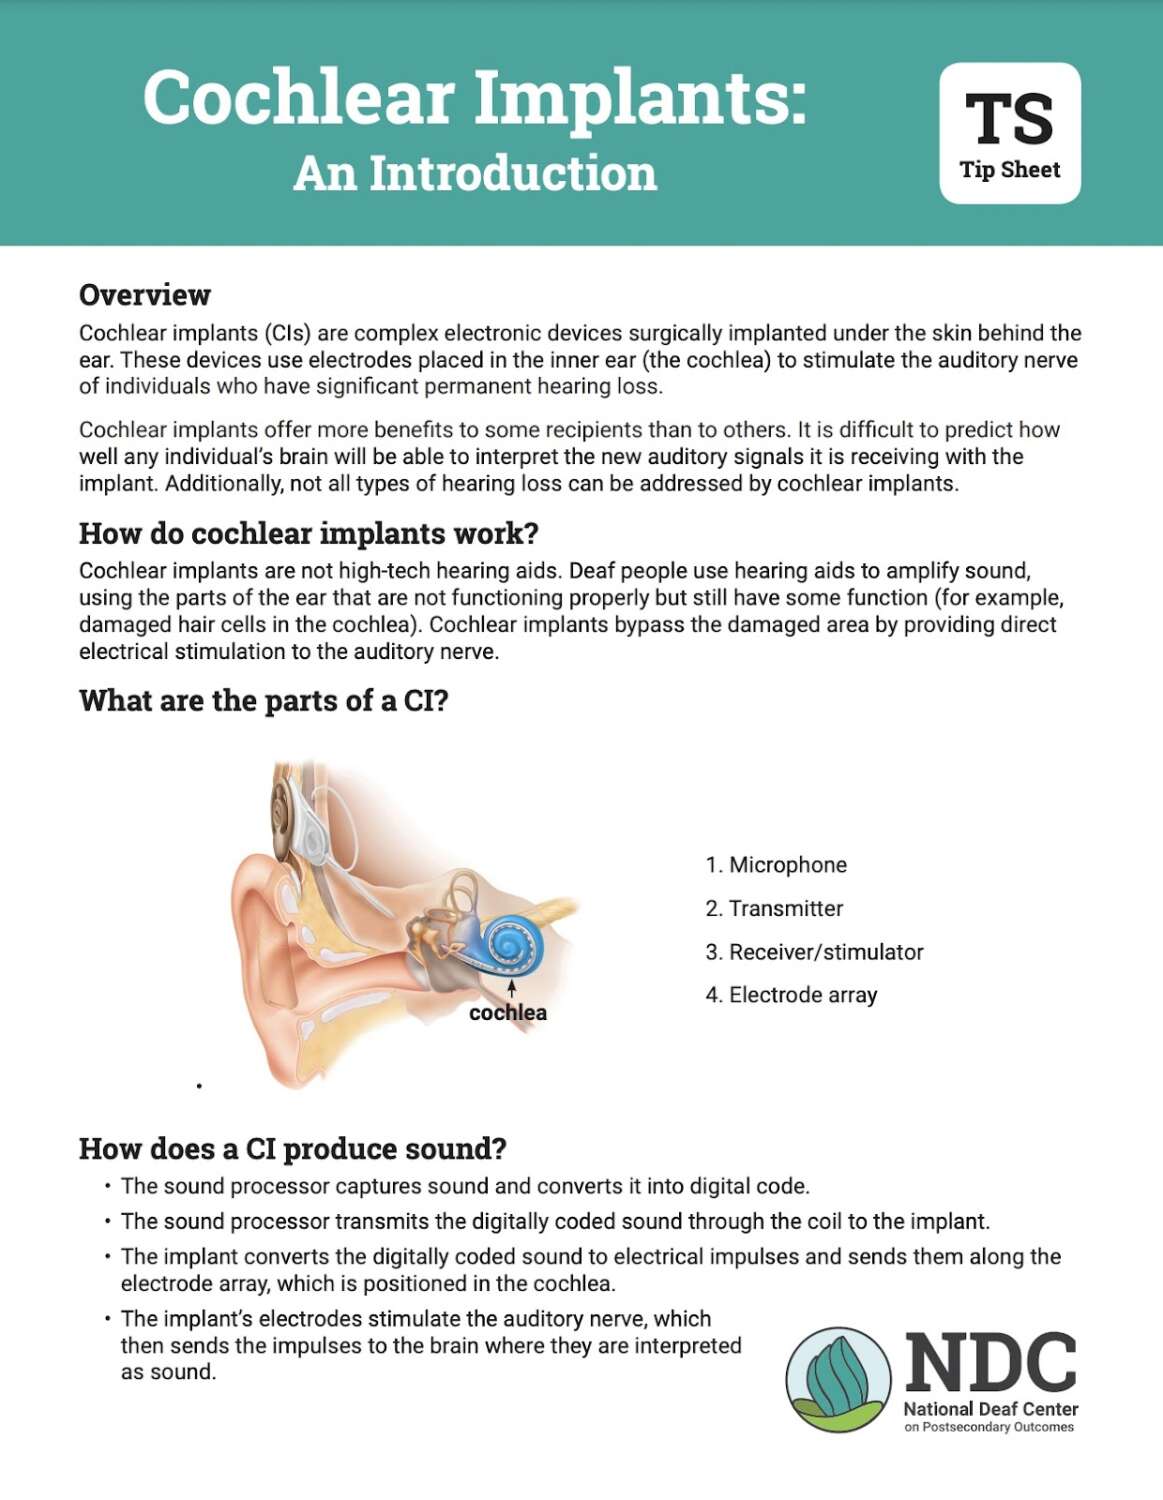 The image is a text document titled "Cochlear Implants: An Introduction Tip Sheet" describing cochlear implants, their function, and how they work. It provides an overview of cochlear implants, how they work, the parts of a cochlear implant, and how a cochlear implant produces sound. It also discusses the benefits and limitations of cochlear implants.